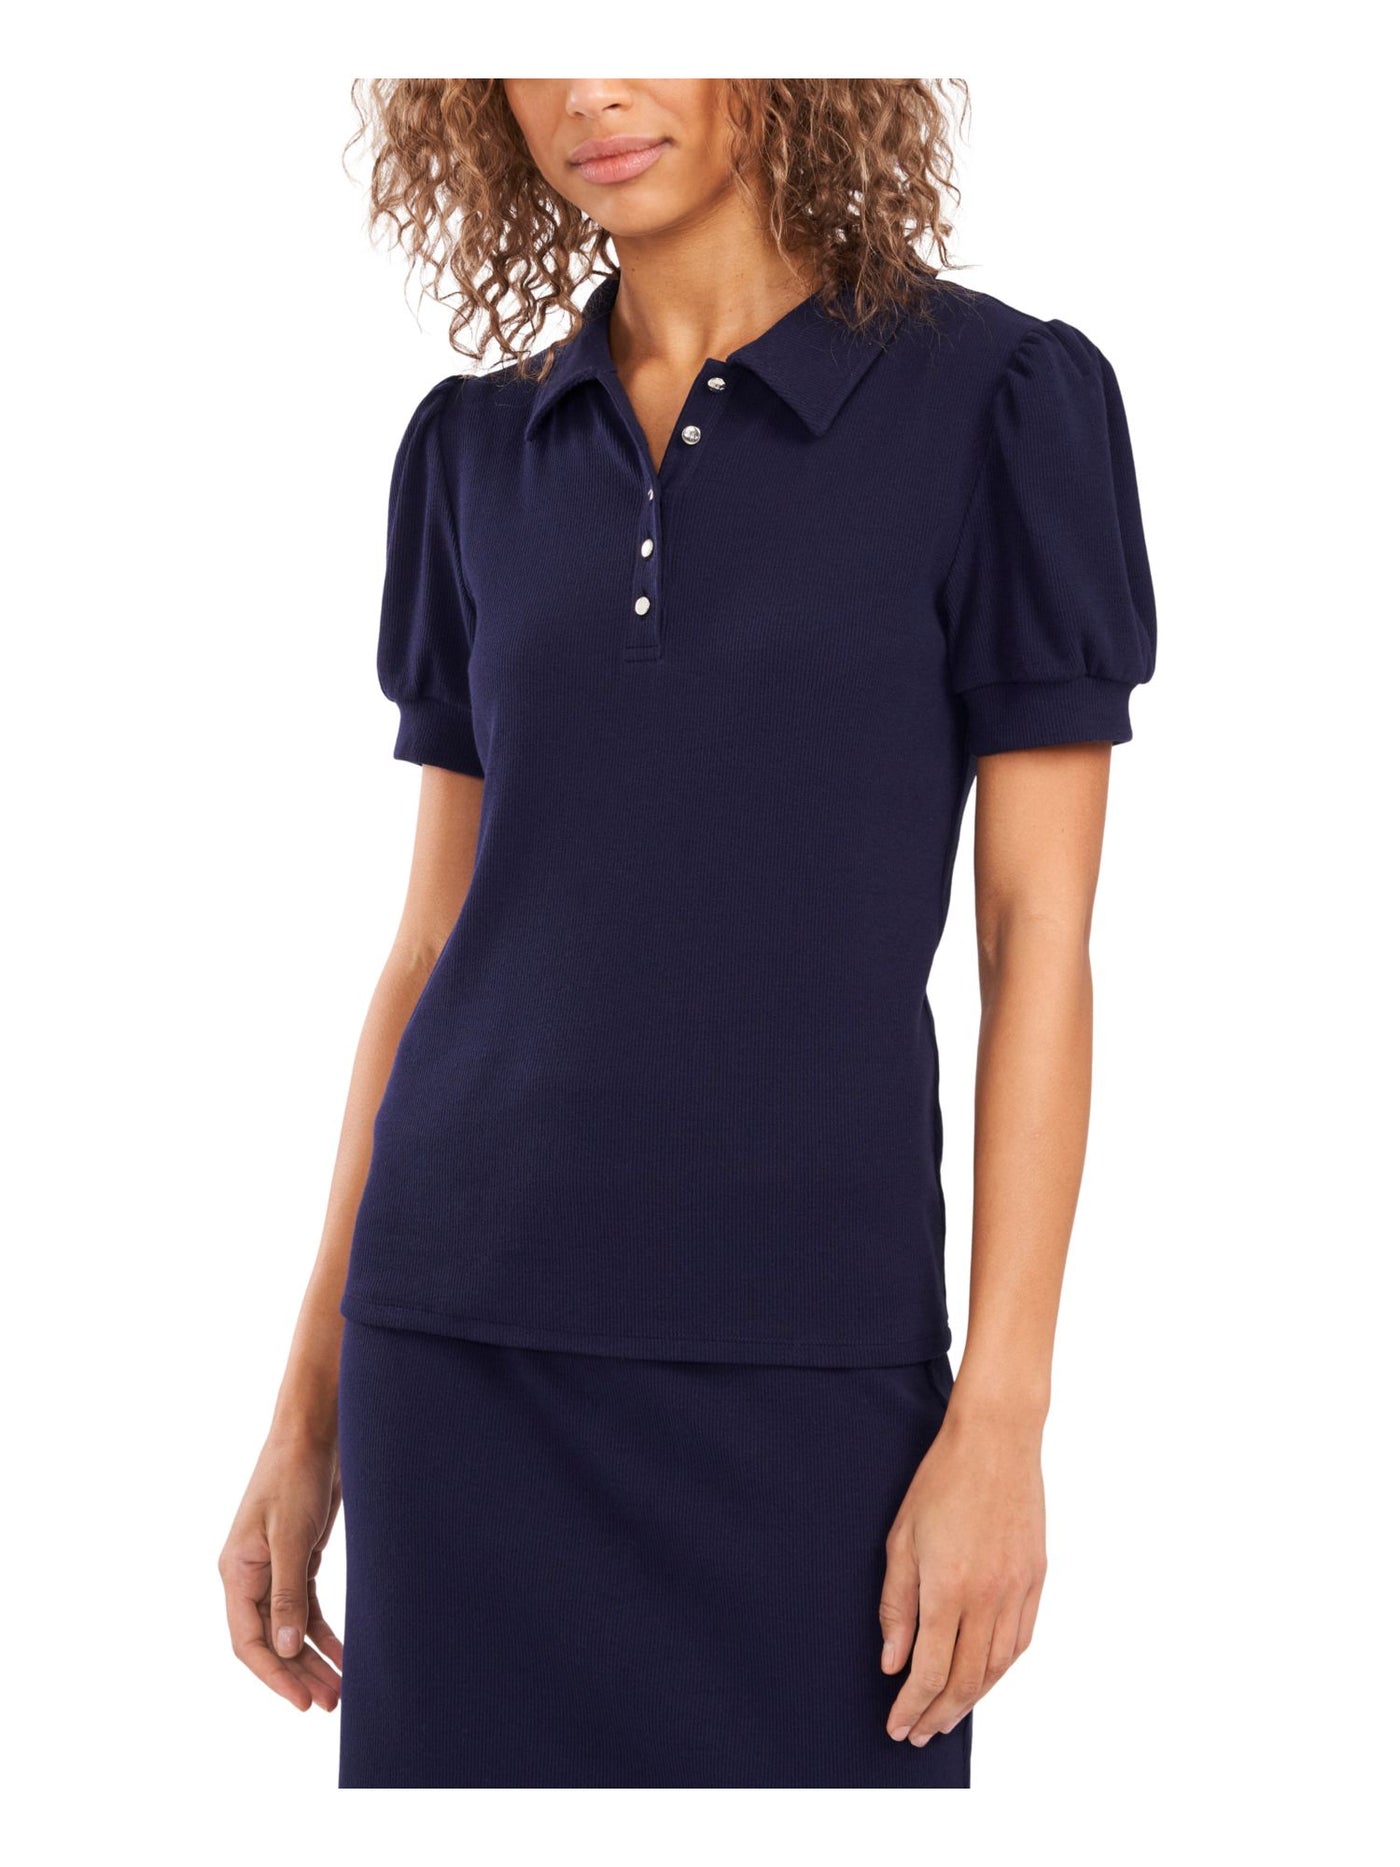 RILEY&RAE Womens Navy Stretch Ribbed Polo Pouf Sleeve Collared Top S